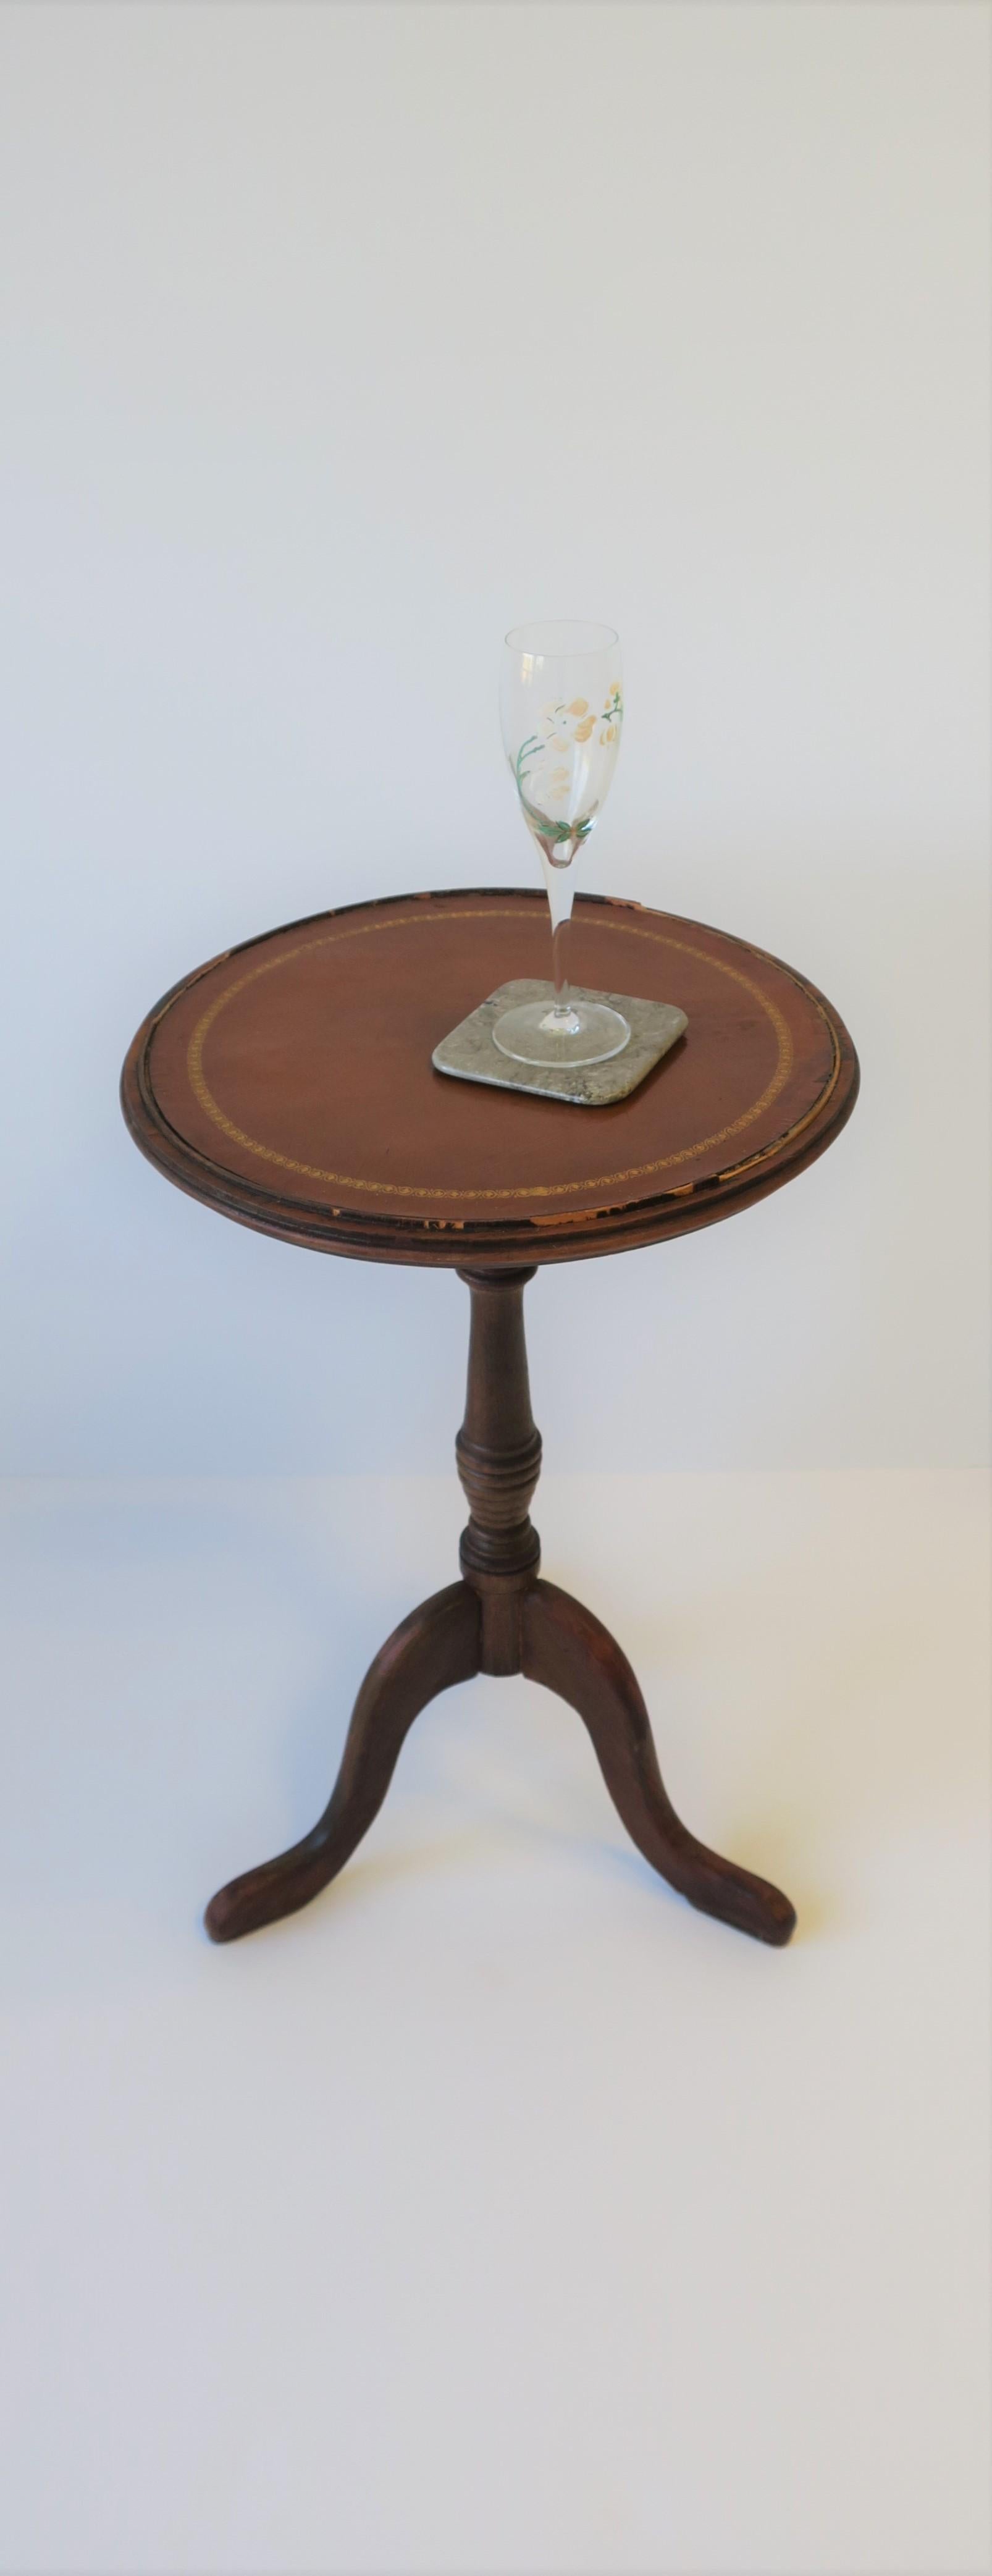 Euro Tripod Leather and Wood Side or Drinks Table 1